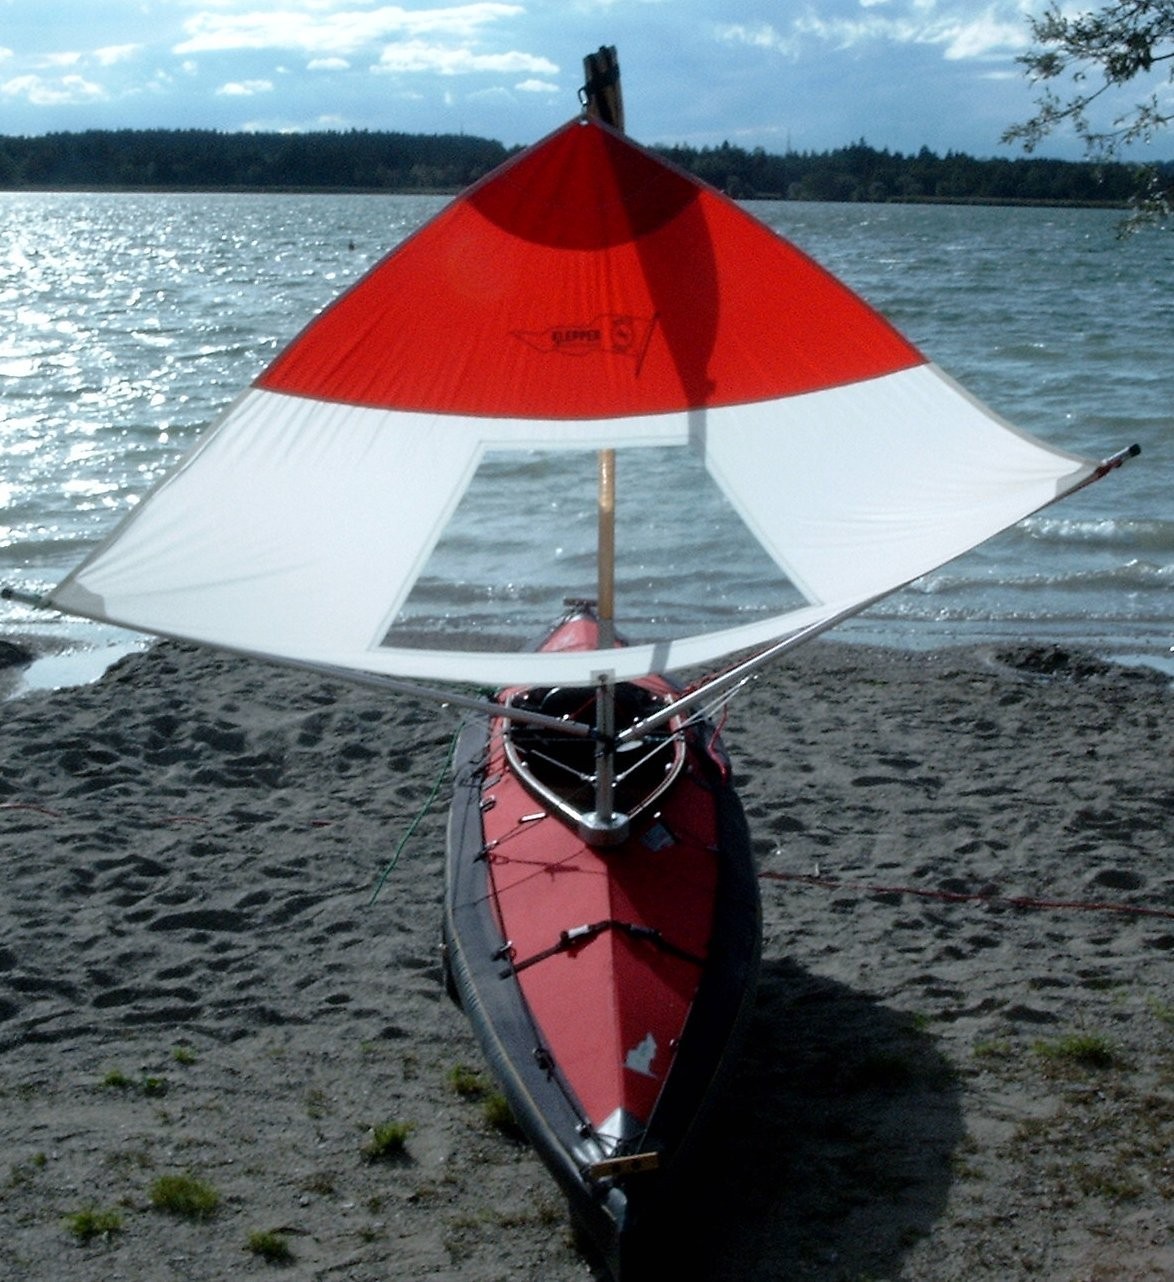 Driftsail "Freewind", blue-white, including viewing window